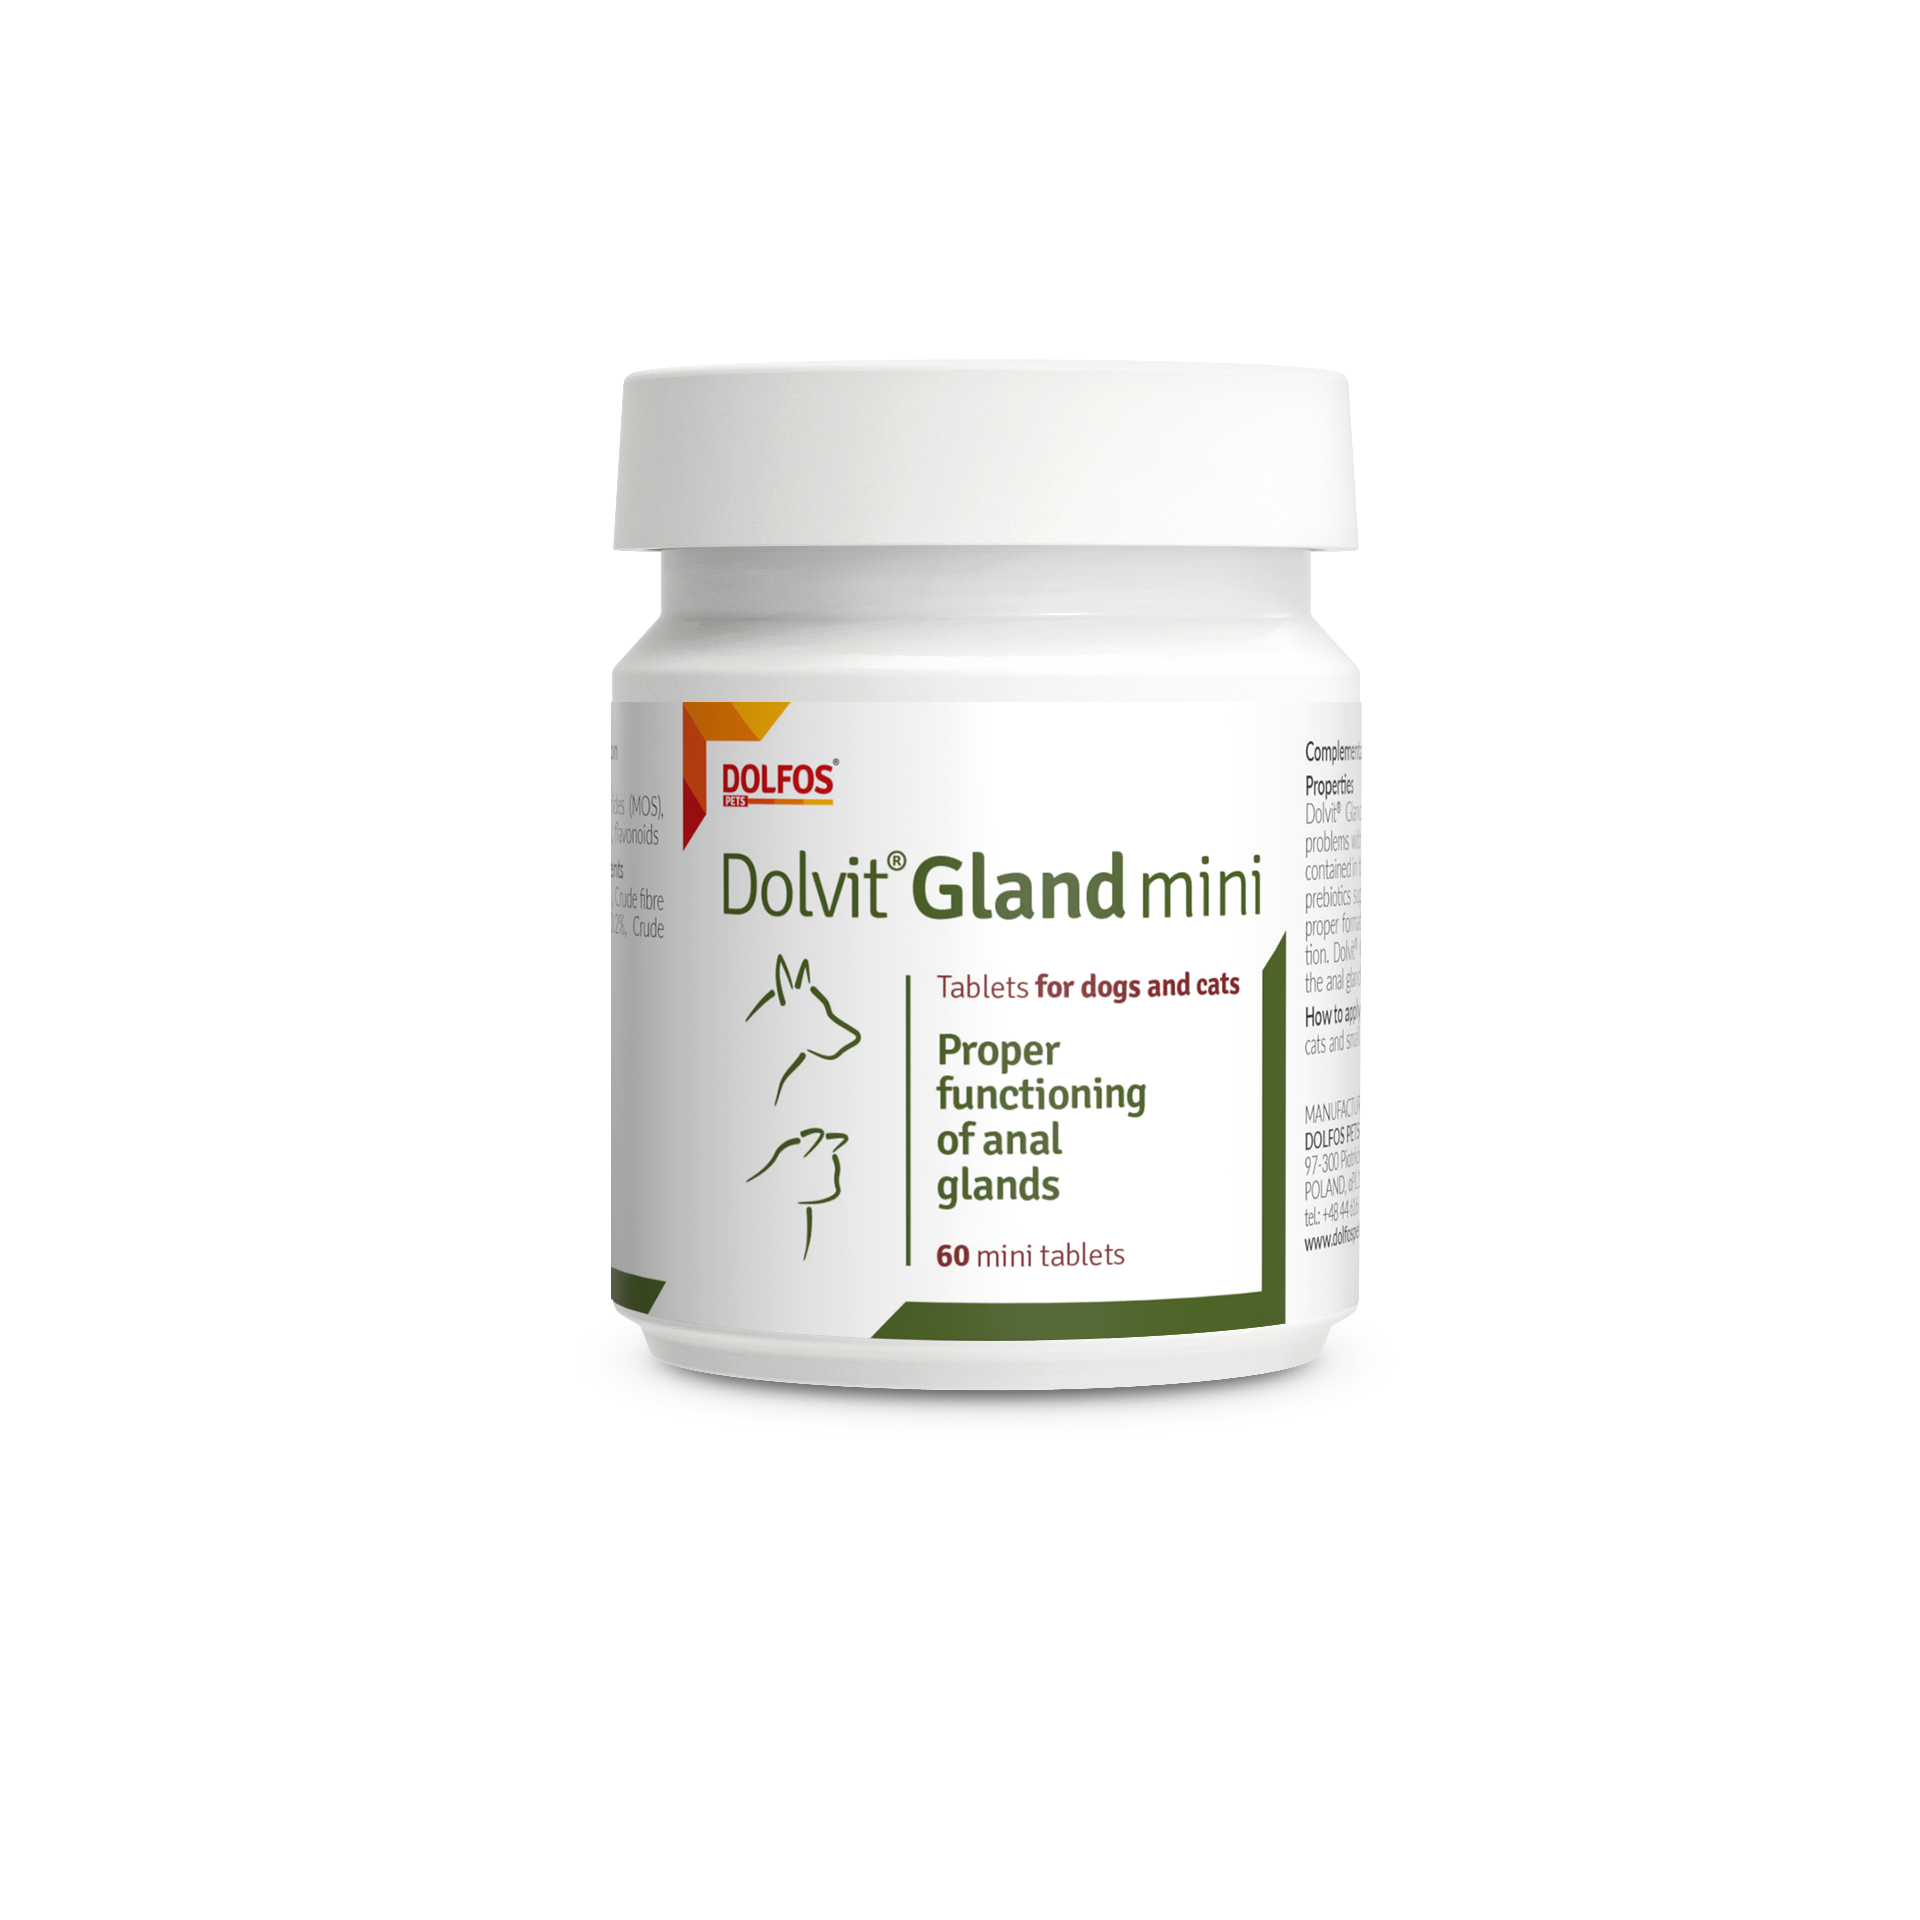 Dolvit Gland mini anal glands for cats and dogs is a natural product for dogs that have problems emptying the perianal glands.